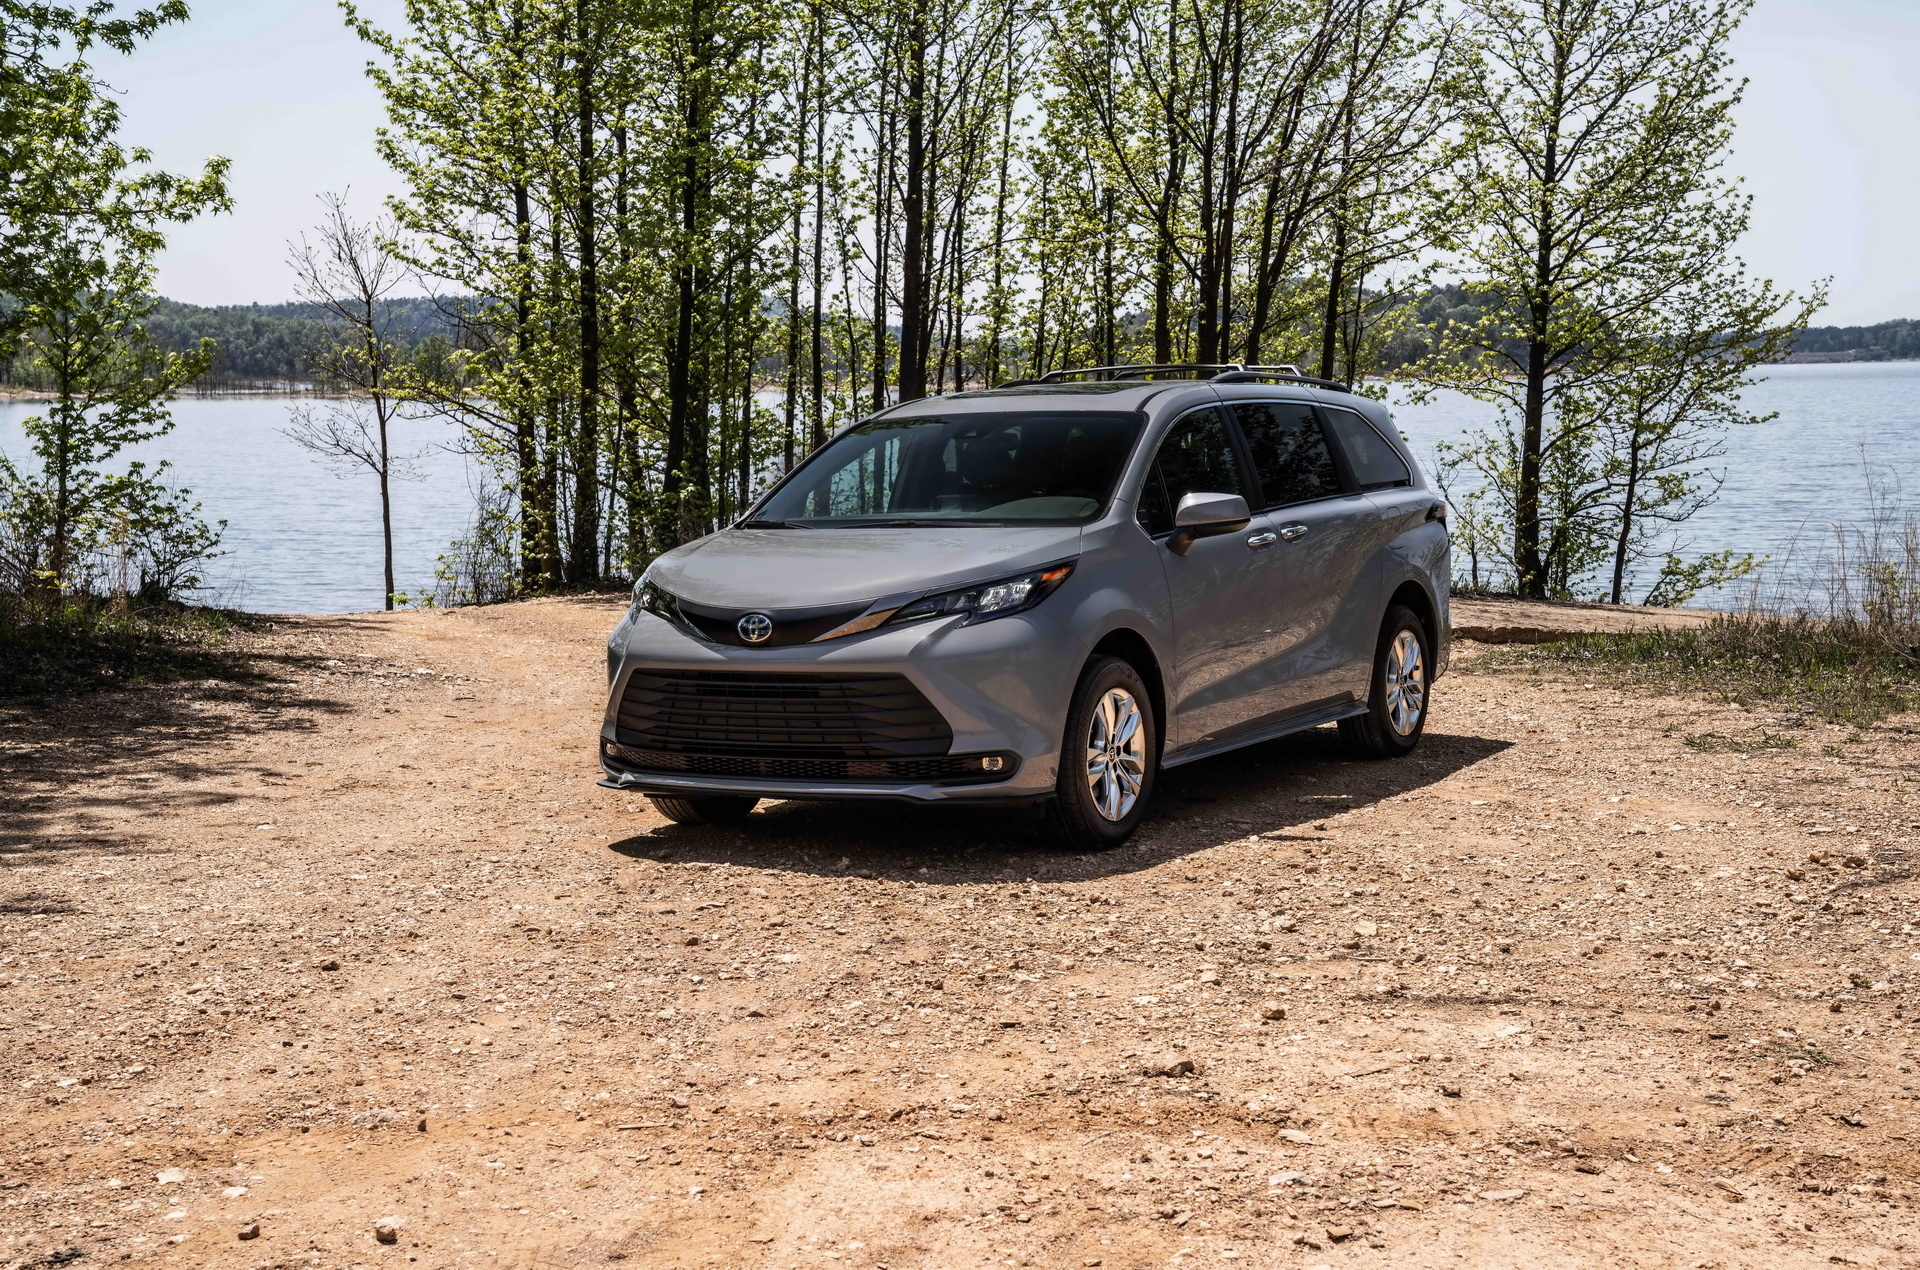 Toyota Sienna, Woodland special edition refinement, Stylish family vehicle, Enhanced features, 1920x1270 HD Desktop